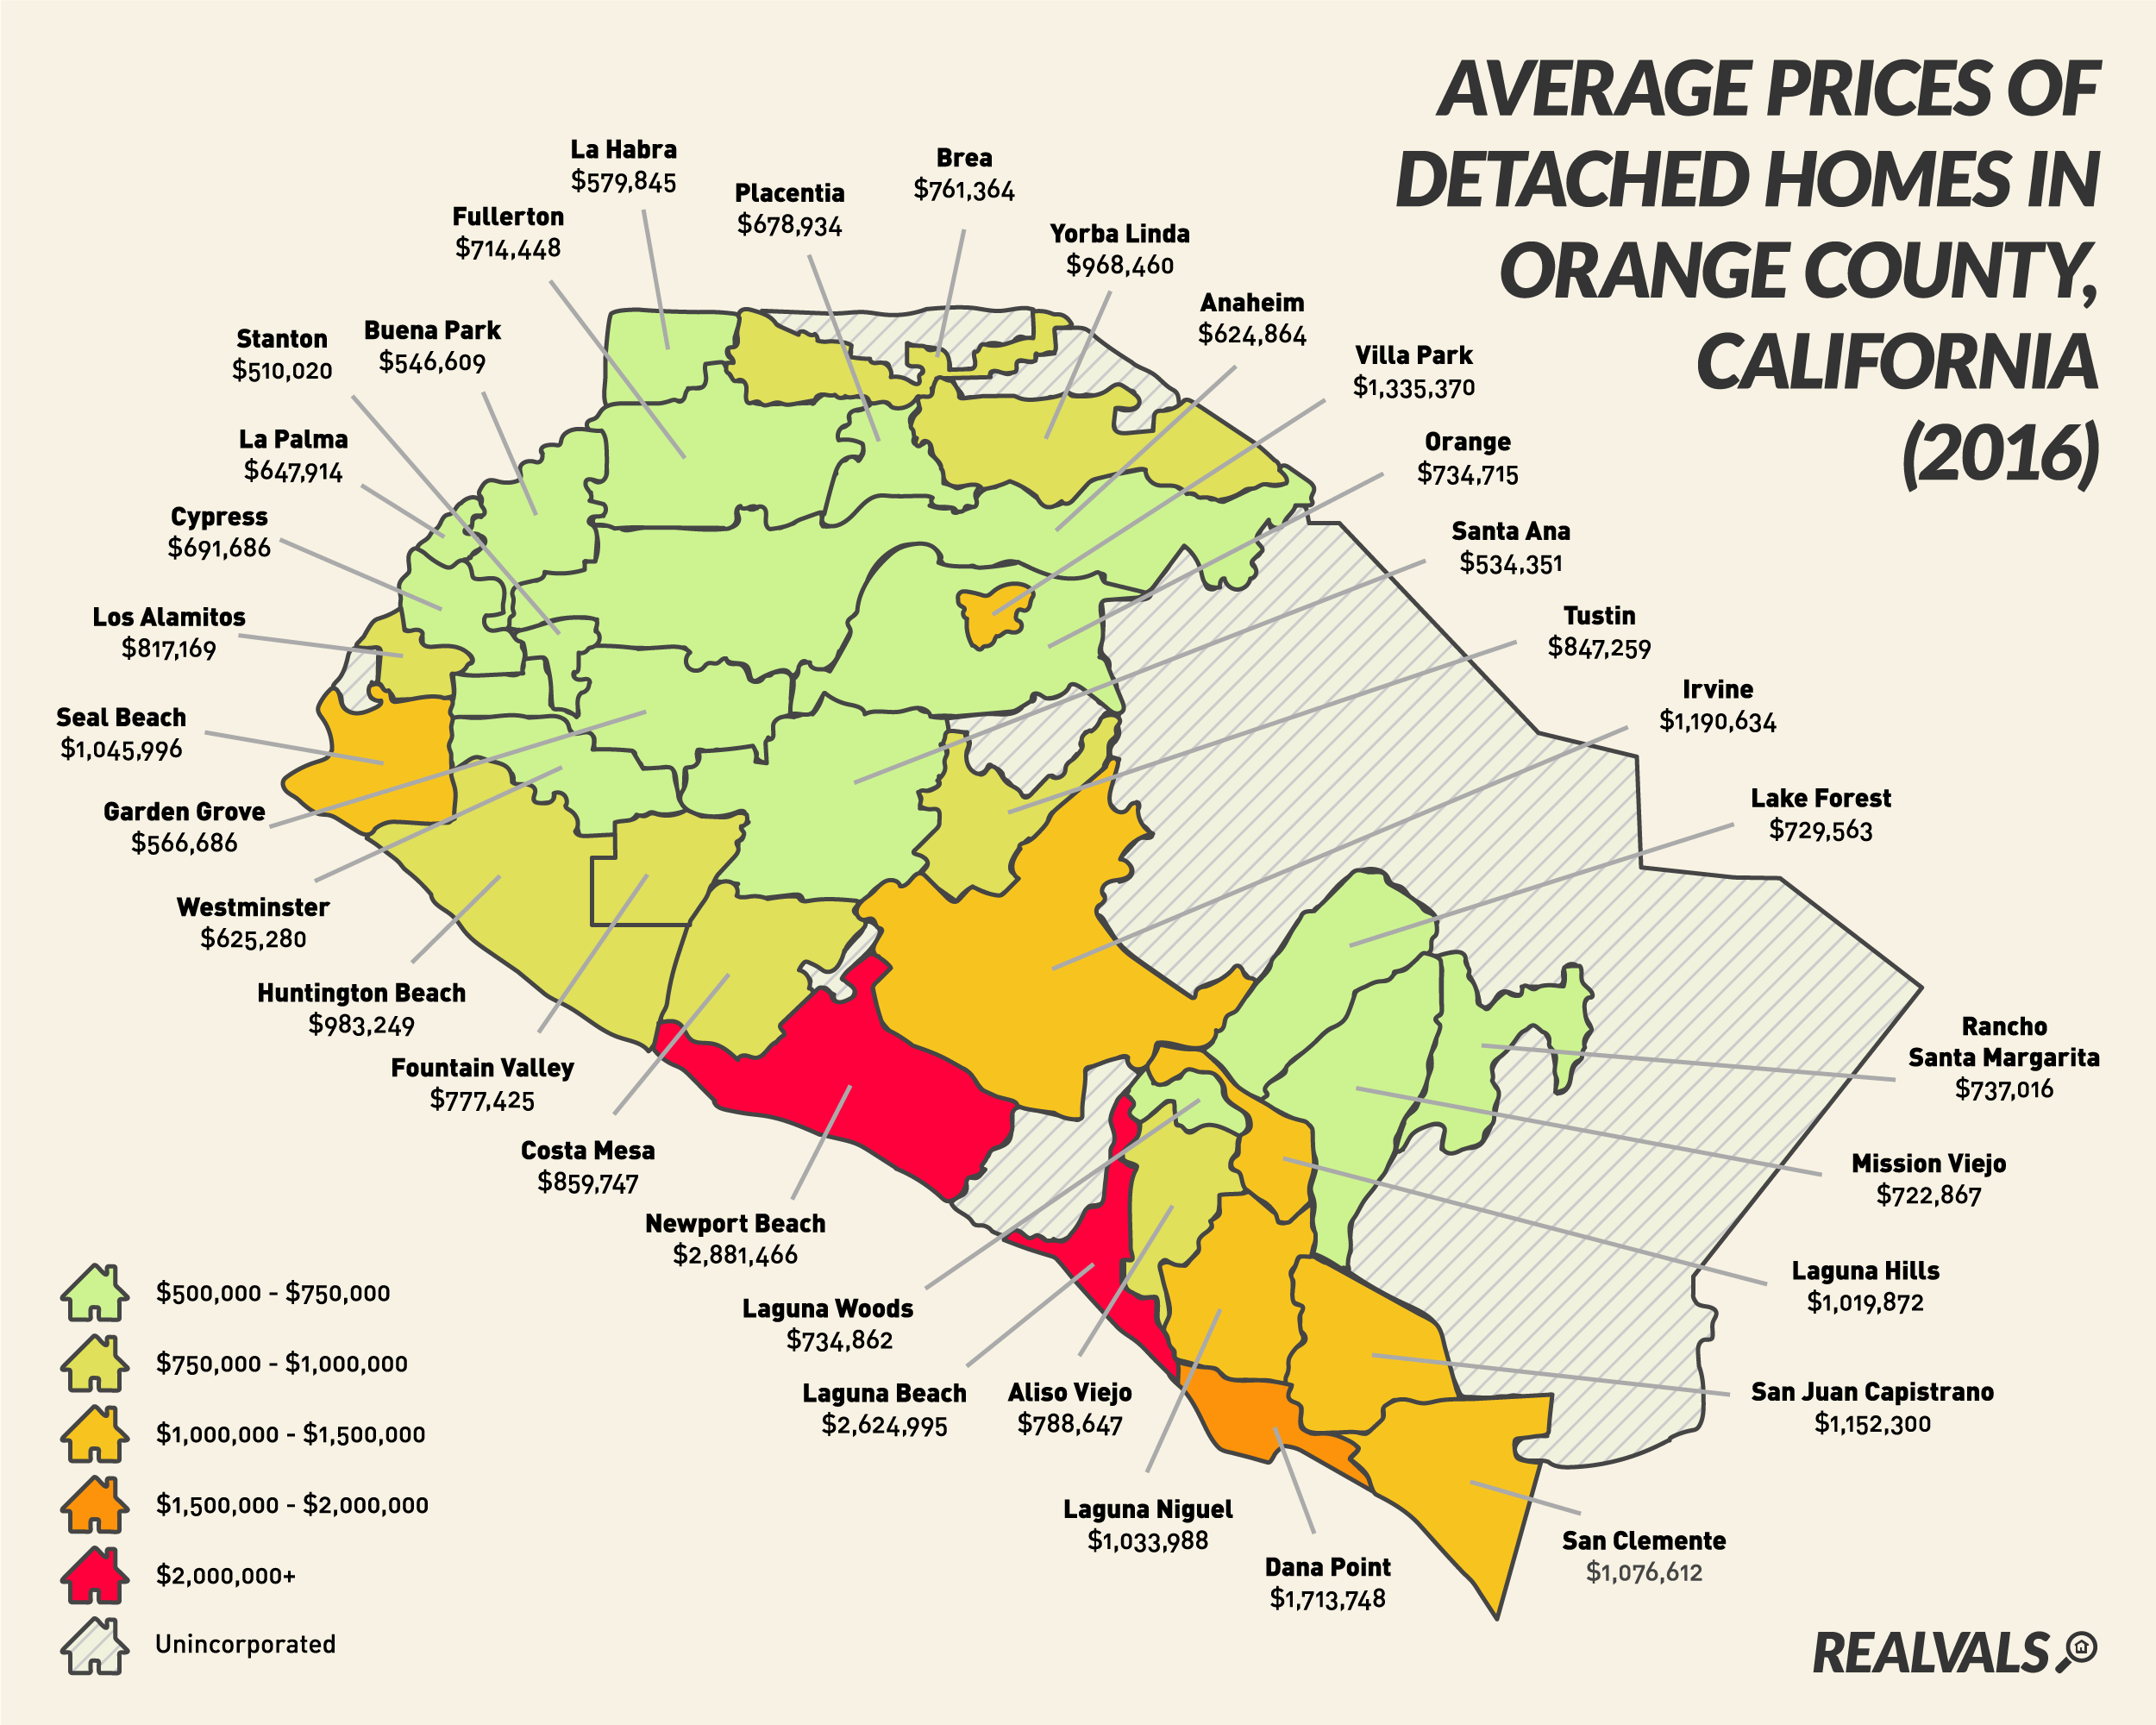 Orange County Detached Home Prices 2016